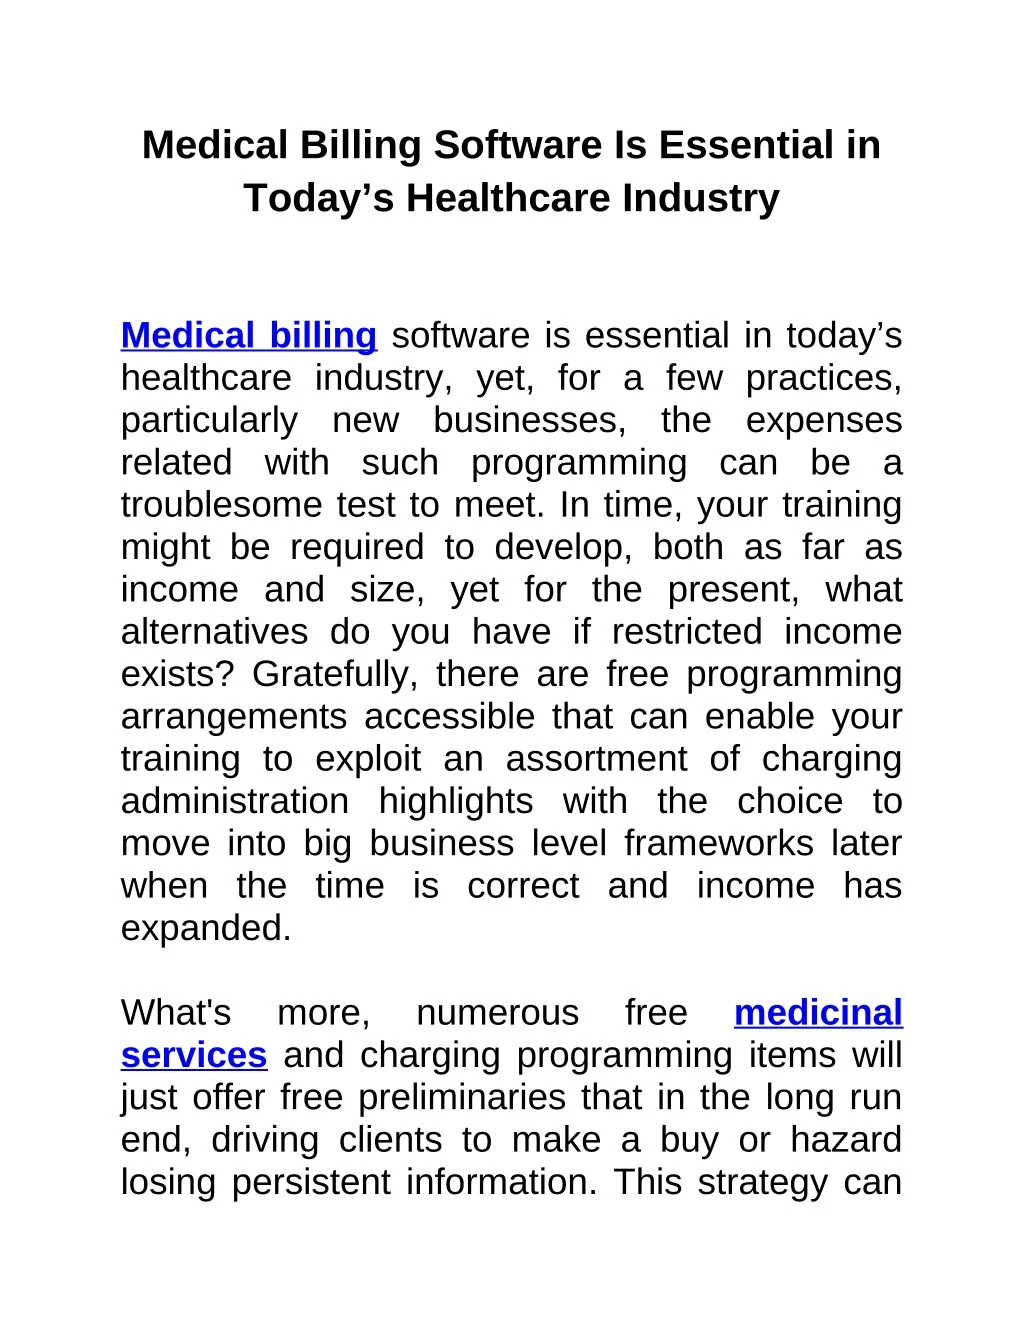 medical billing software is essential in today